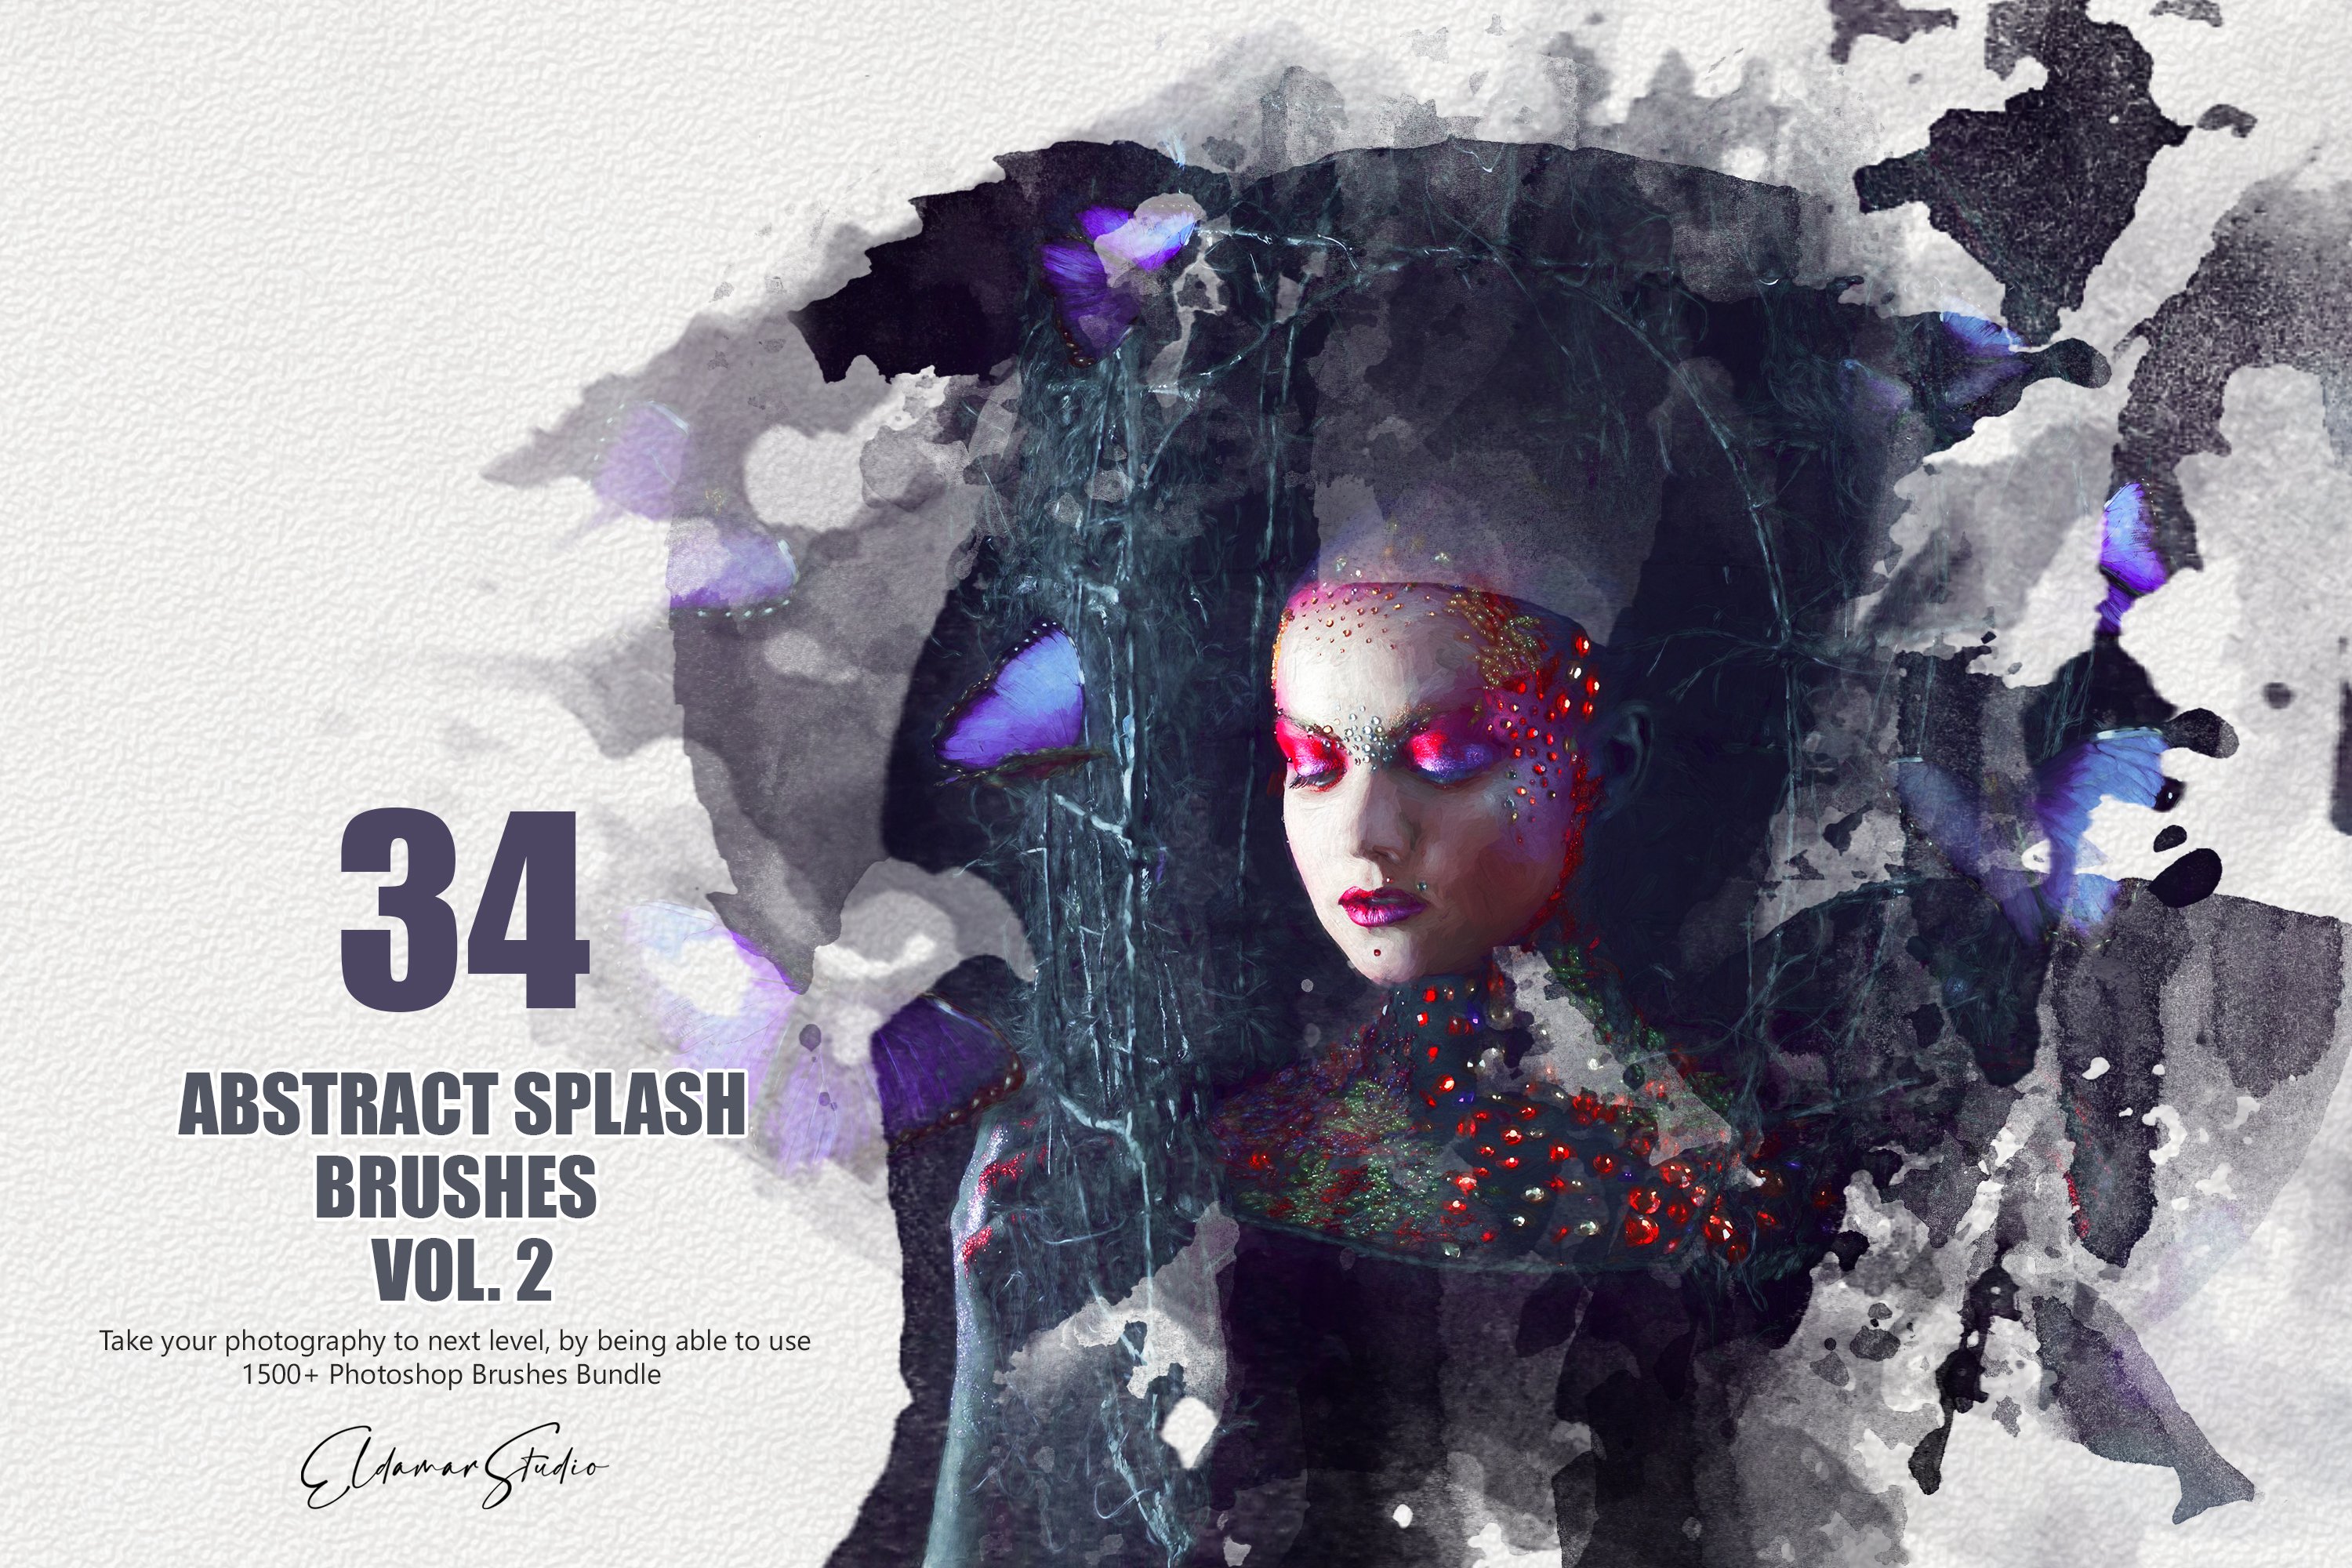 34 Abstract Splash Brushes - Vol. 2cover image.